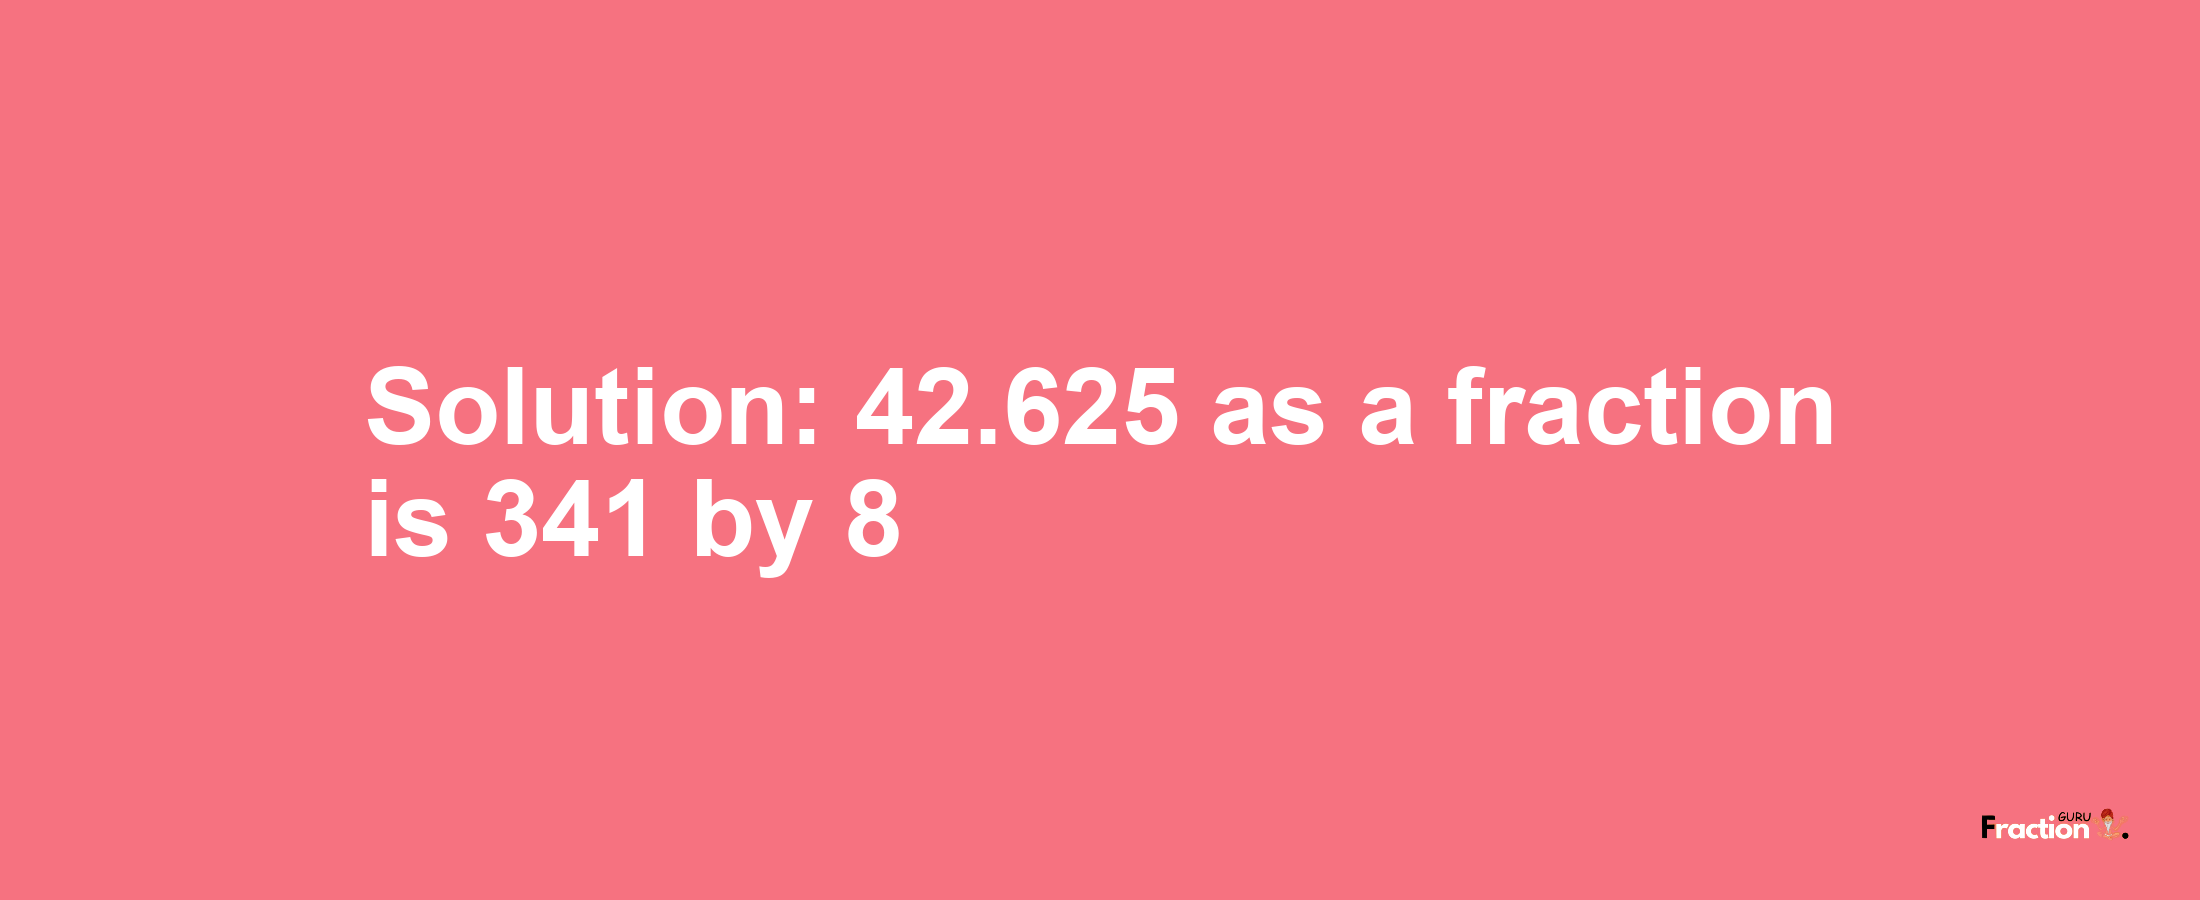 Solution:42.625 as a fraction is 341/8